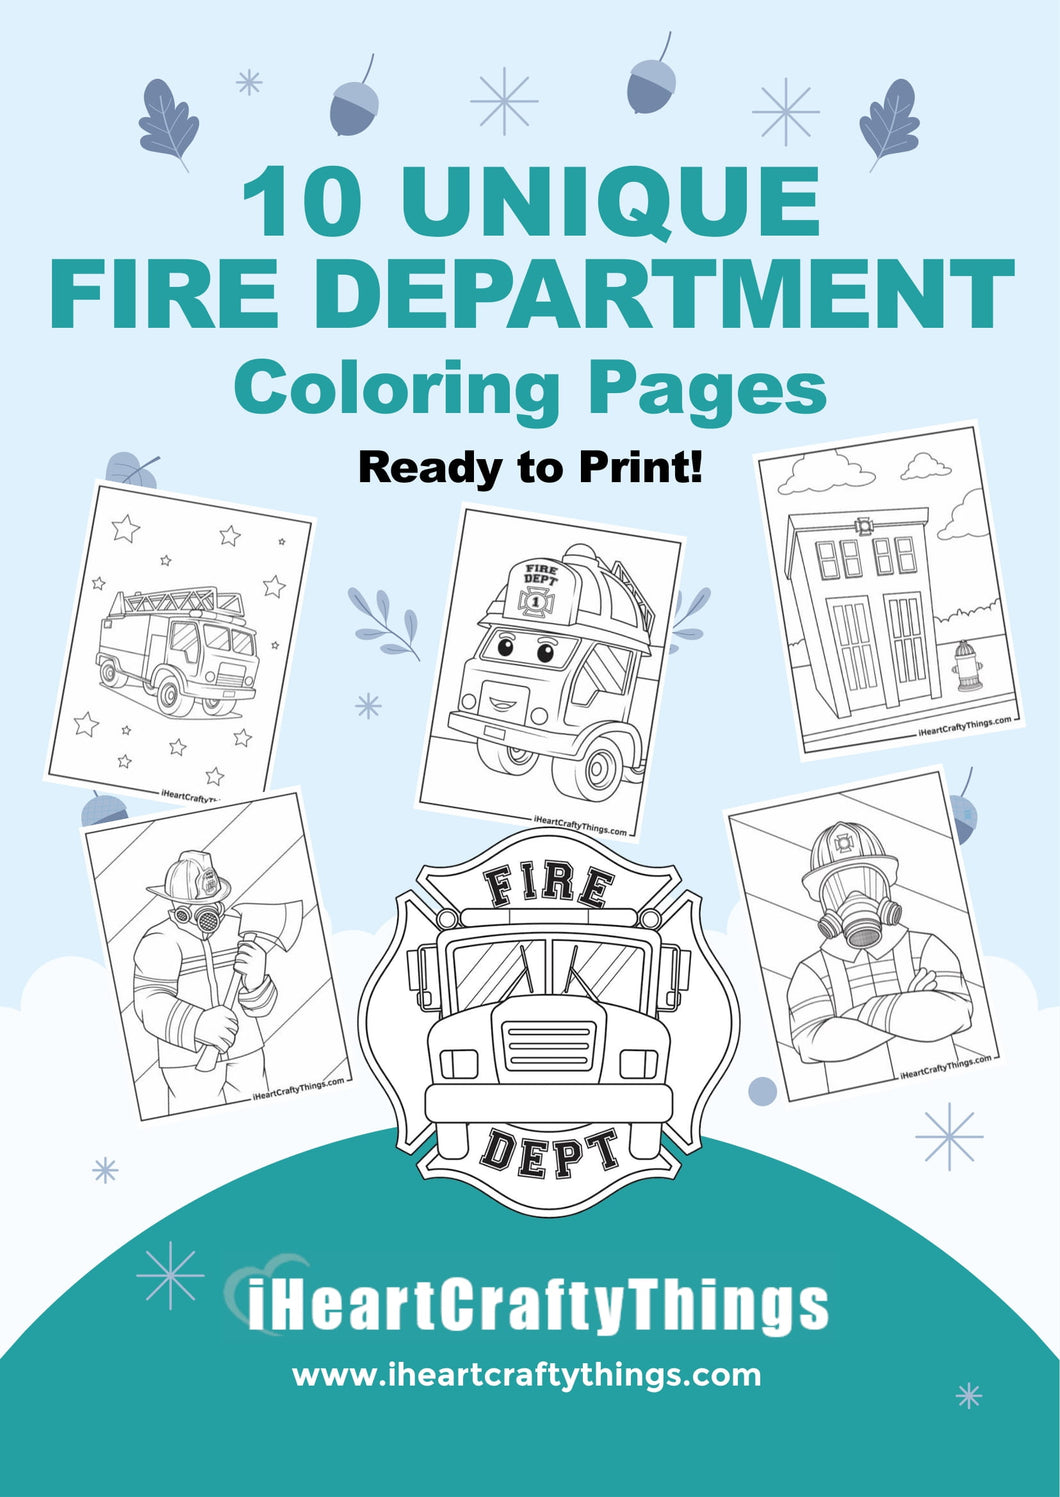 10 FIRE DEPARTMENT COLORING PAGES